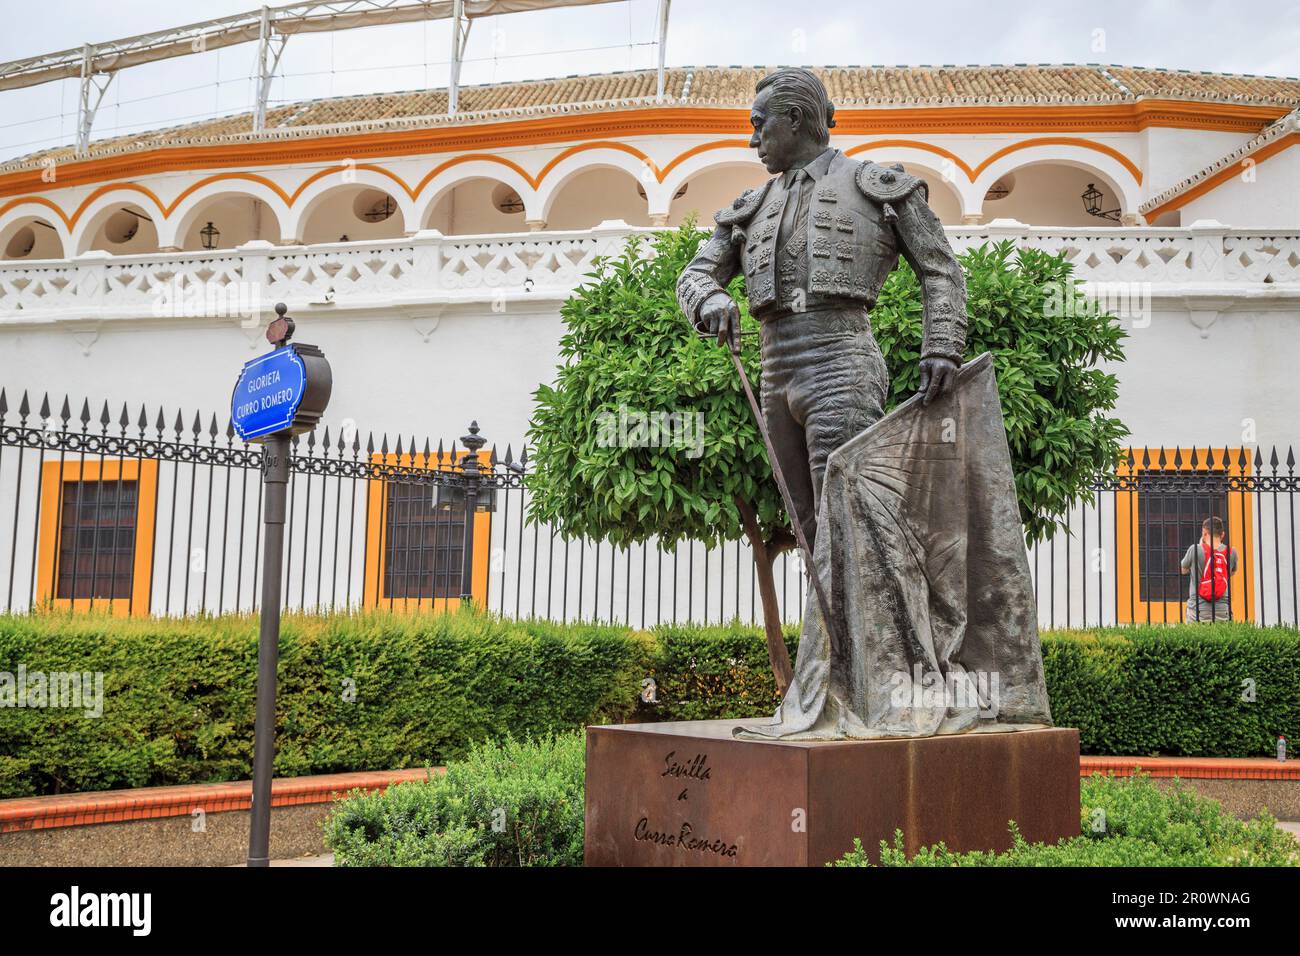 SEVILLE, SPAIN - MAY 21, 2017: This is the monument to the bullfighter Curro Romero at the Plaza de Toros de Maestranza arena. Stock Photo